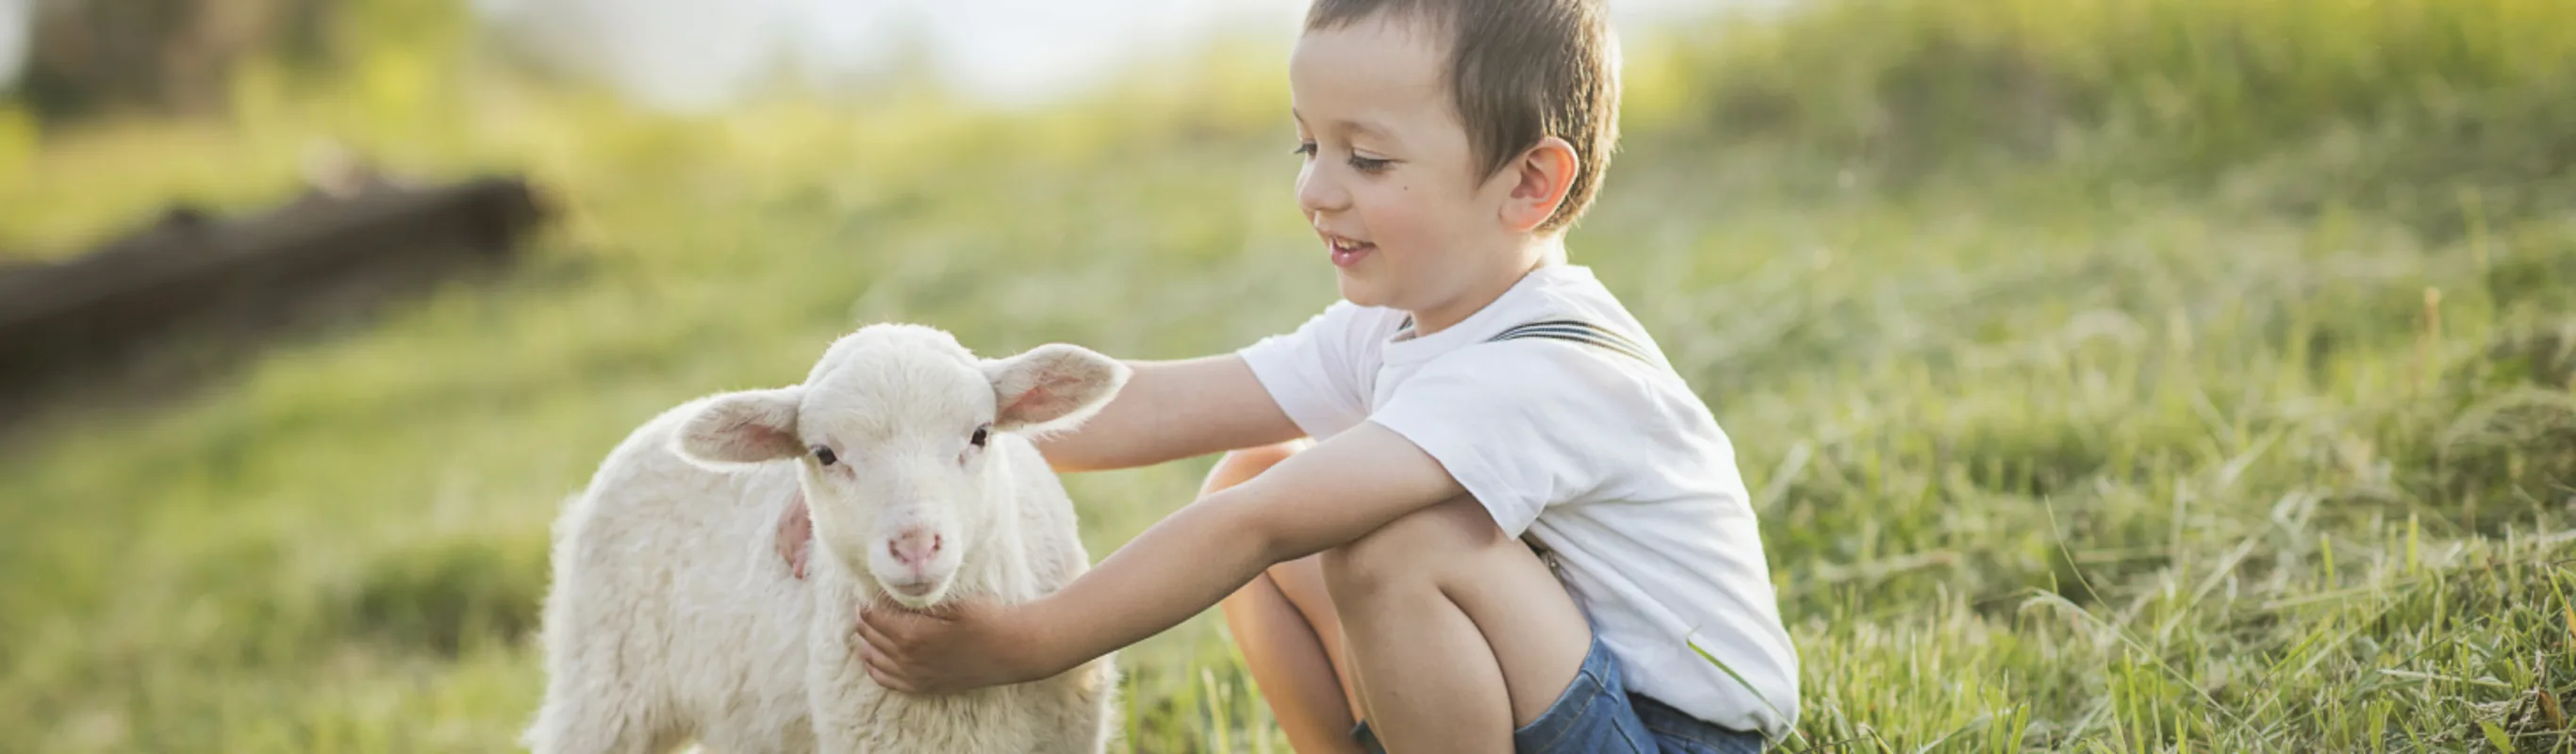 Little boy with sheep